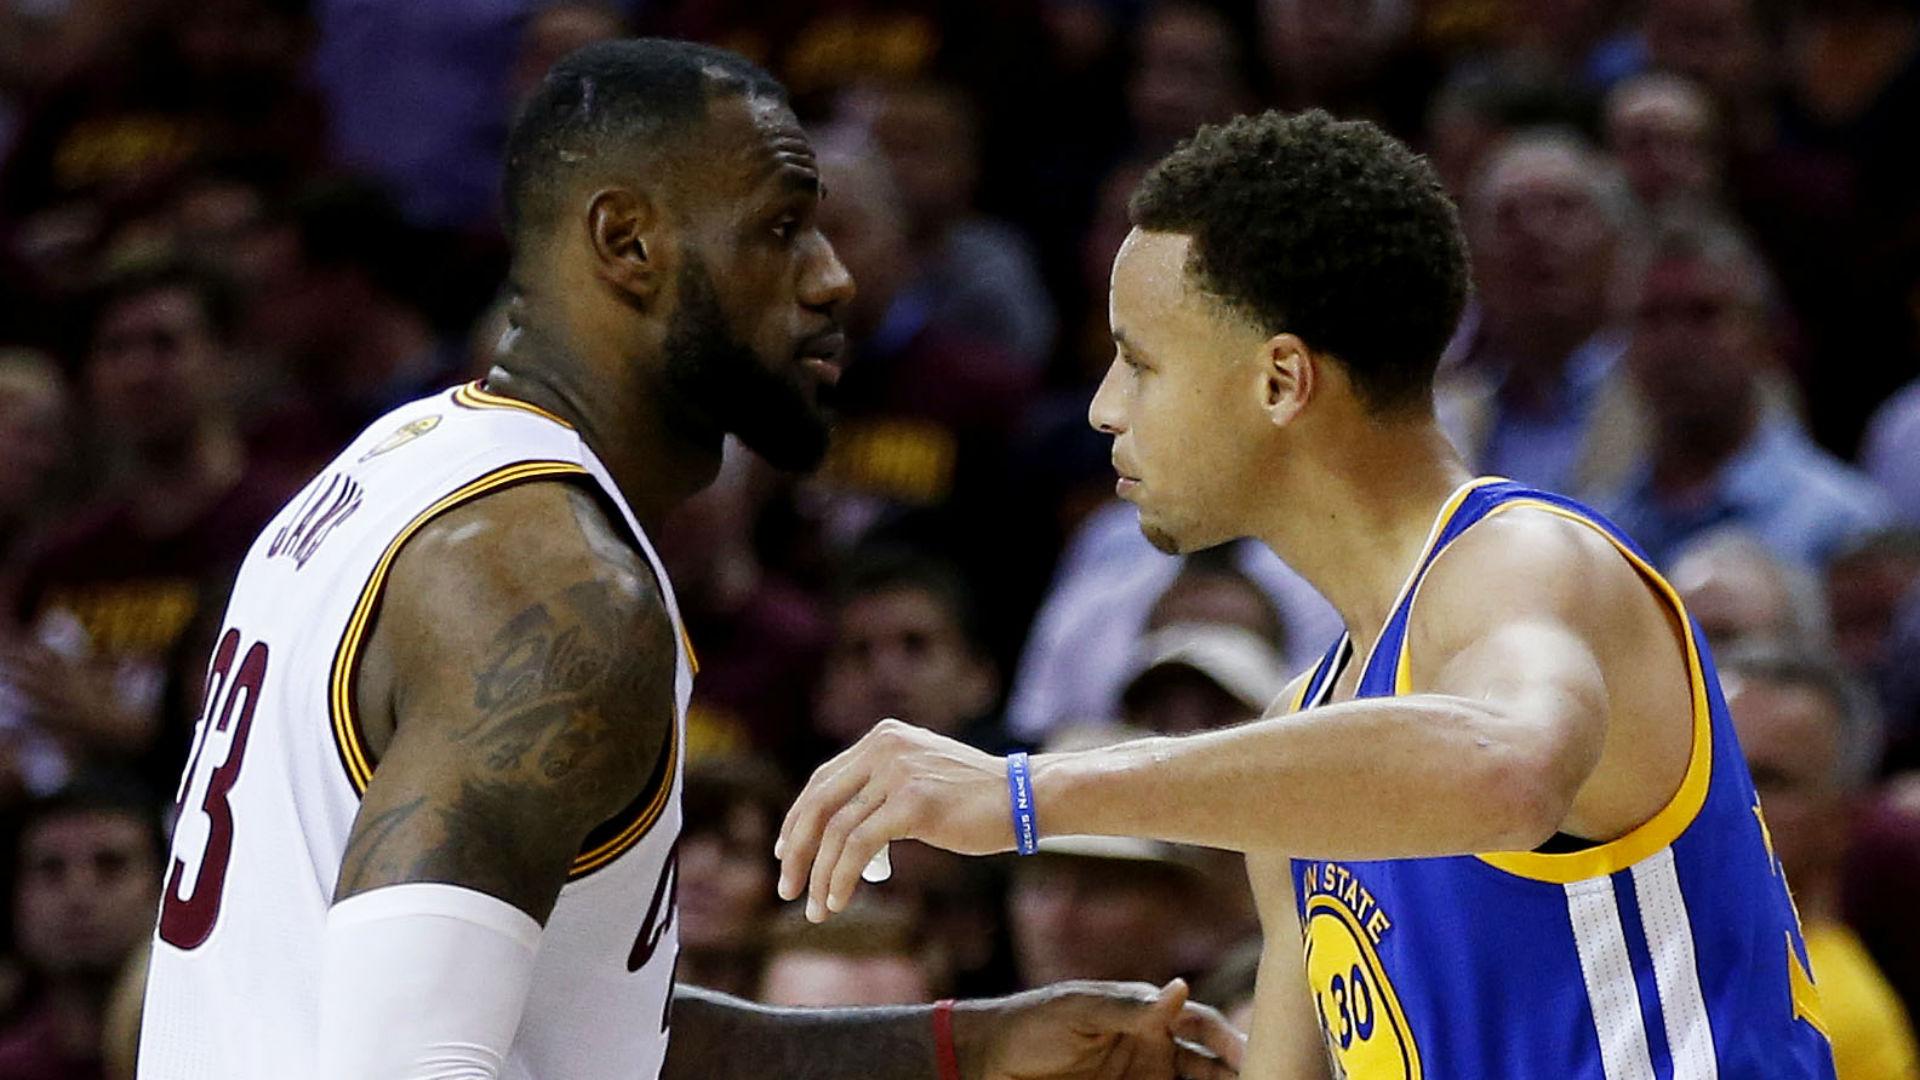 Stephen Curry is over comparisons to LeBron James: 'I'm